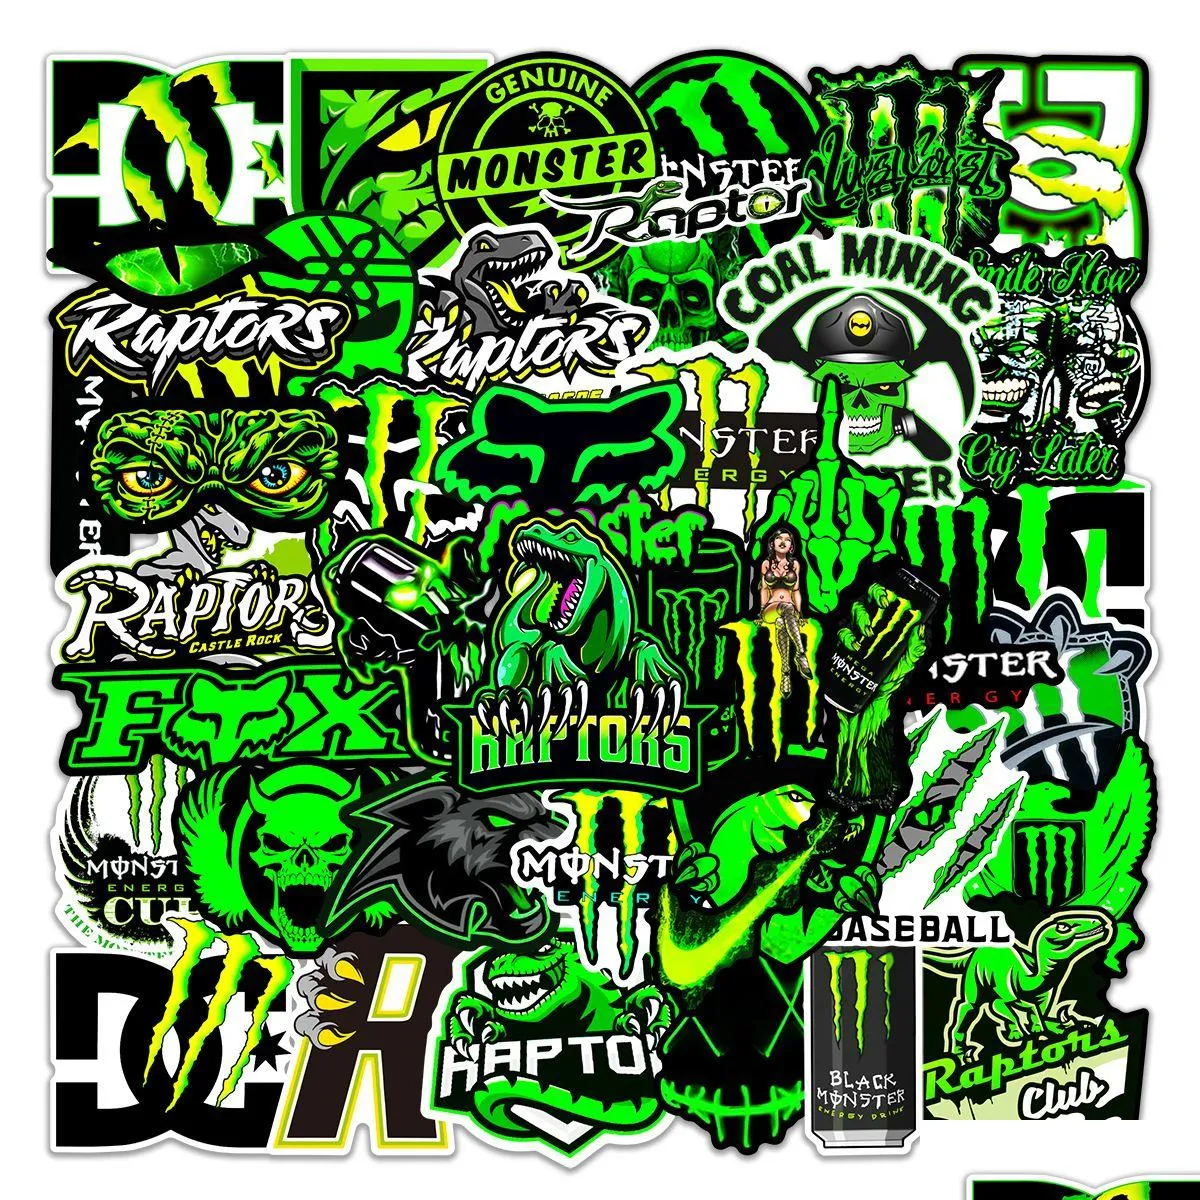 50Pcs Green Fluorescent Dazzle Personality Trend Sticker Monster hunter Stickers Graffiti Kids Toy Skateboard Car Motorcycle Bicycle Sticker